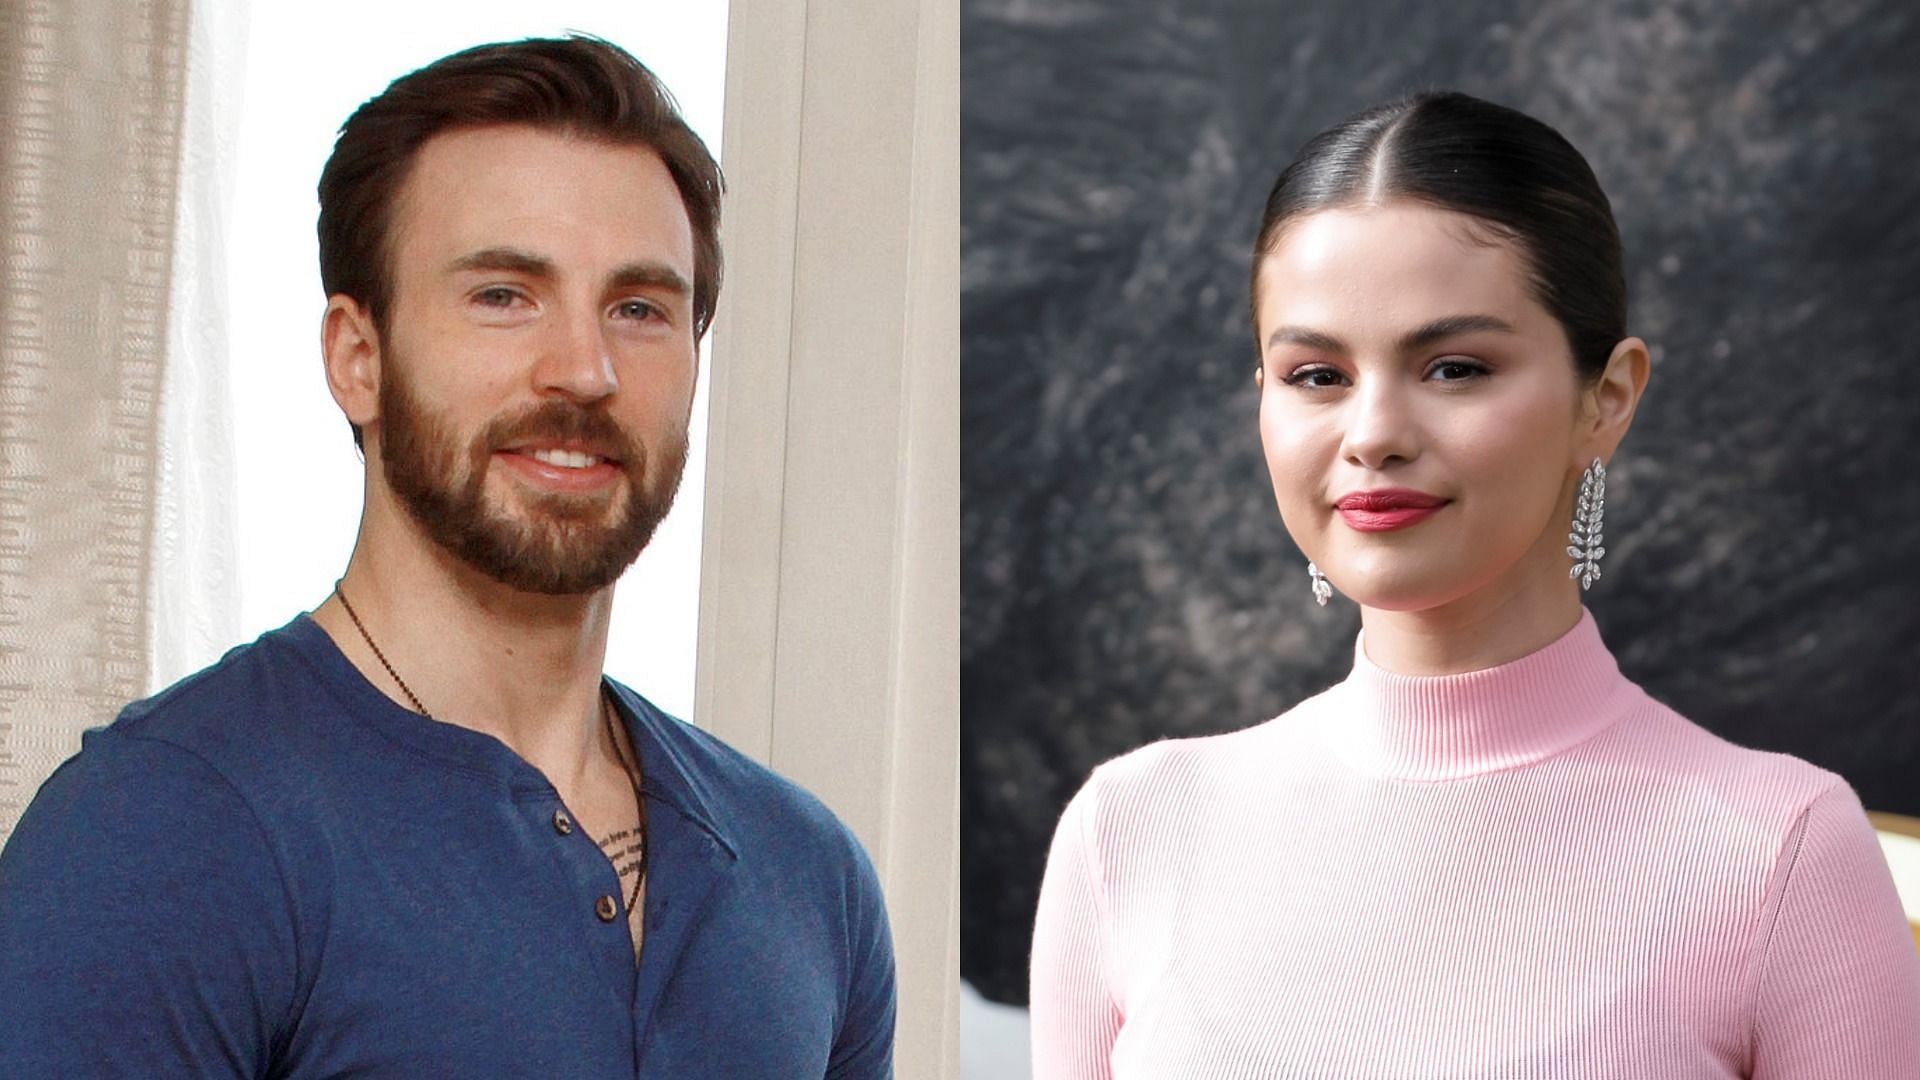 Selena Gomez and Chris Evans dating rumors have continued to make rounds online (Image via Getty Images)